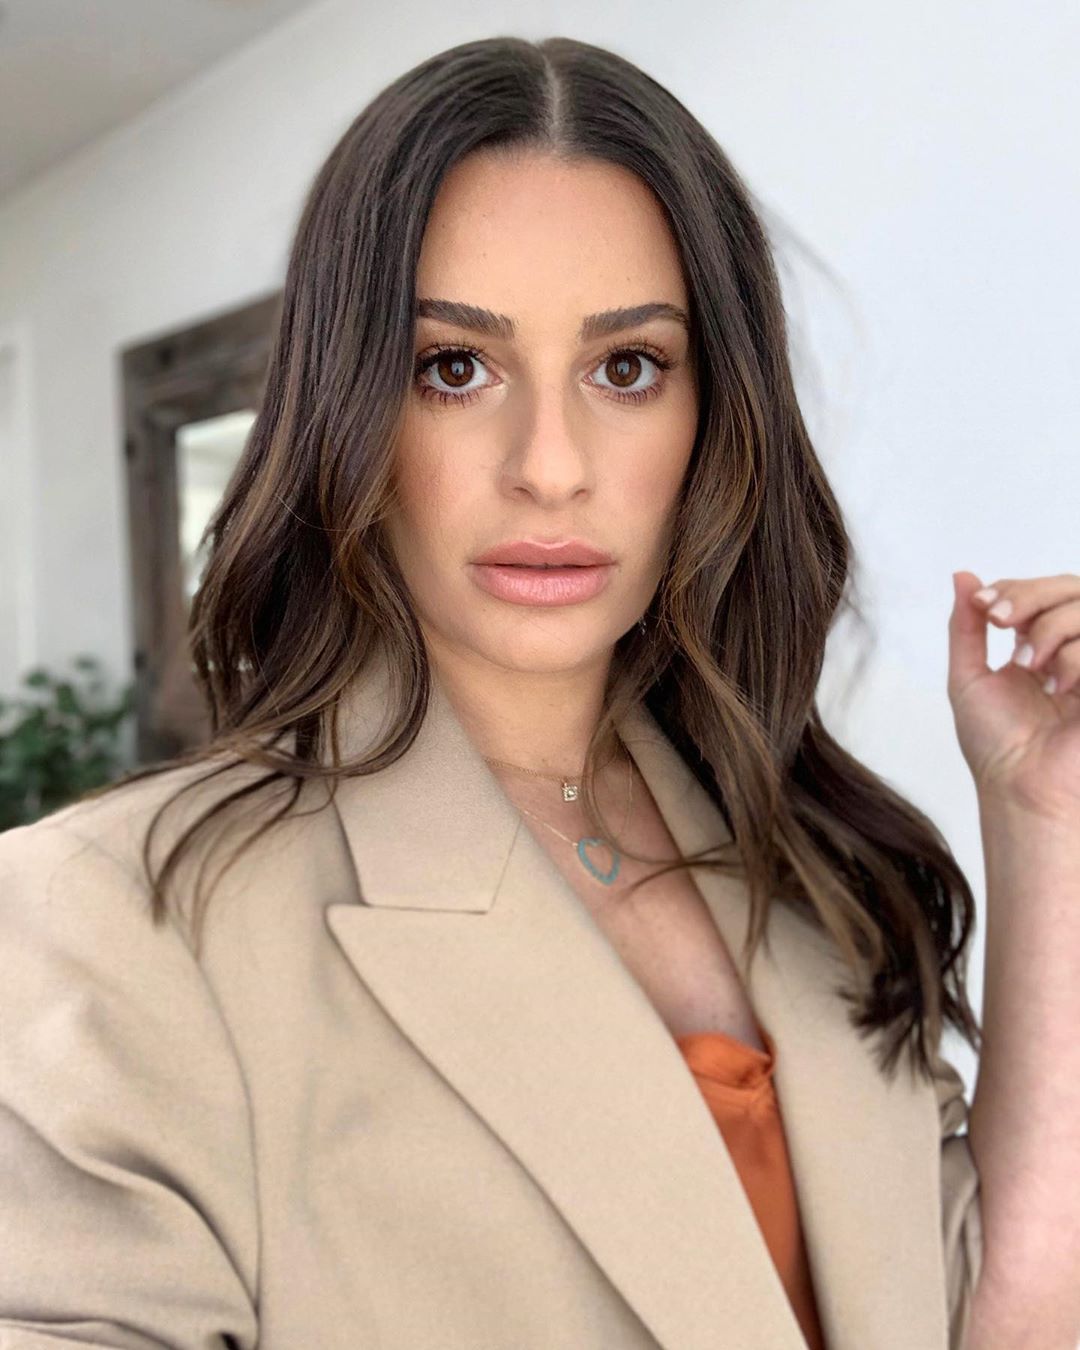 Lea Michele (@leamichele) • Instagram photos and videos